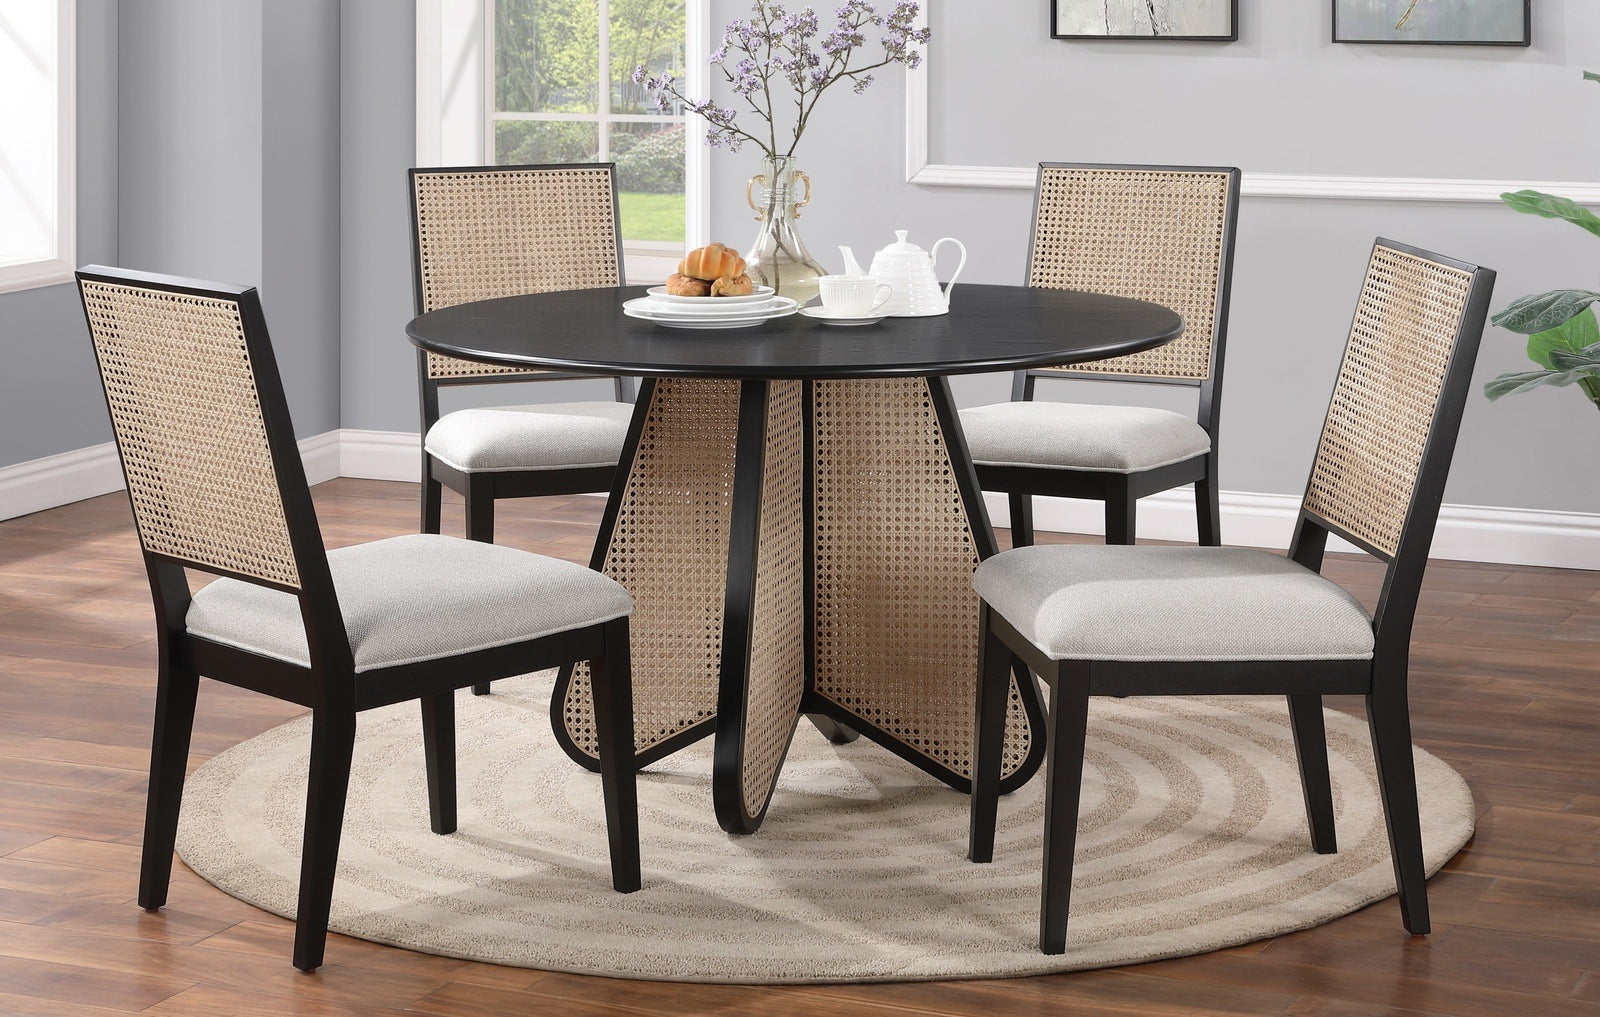 BUTTERFLY DINING TABLE + 4 CHAIRS DINING SET - BLACK